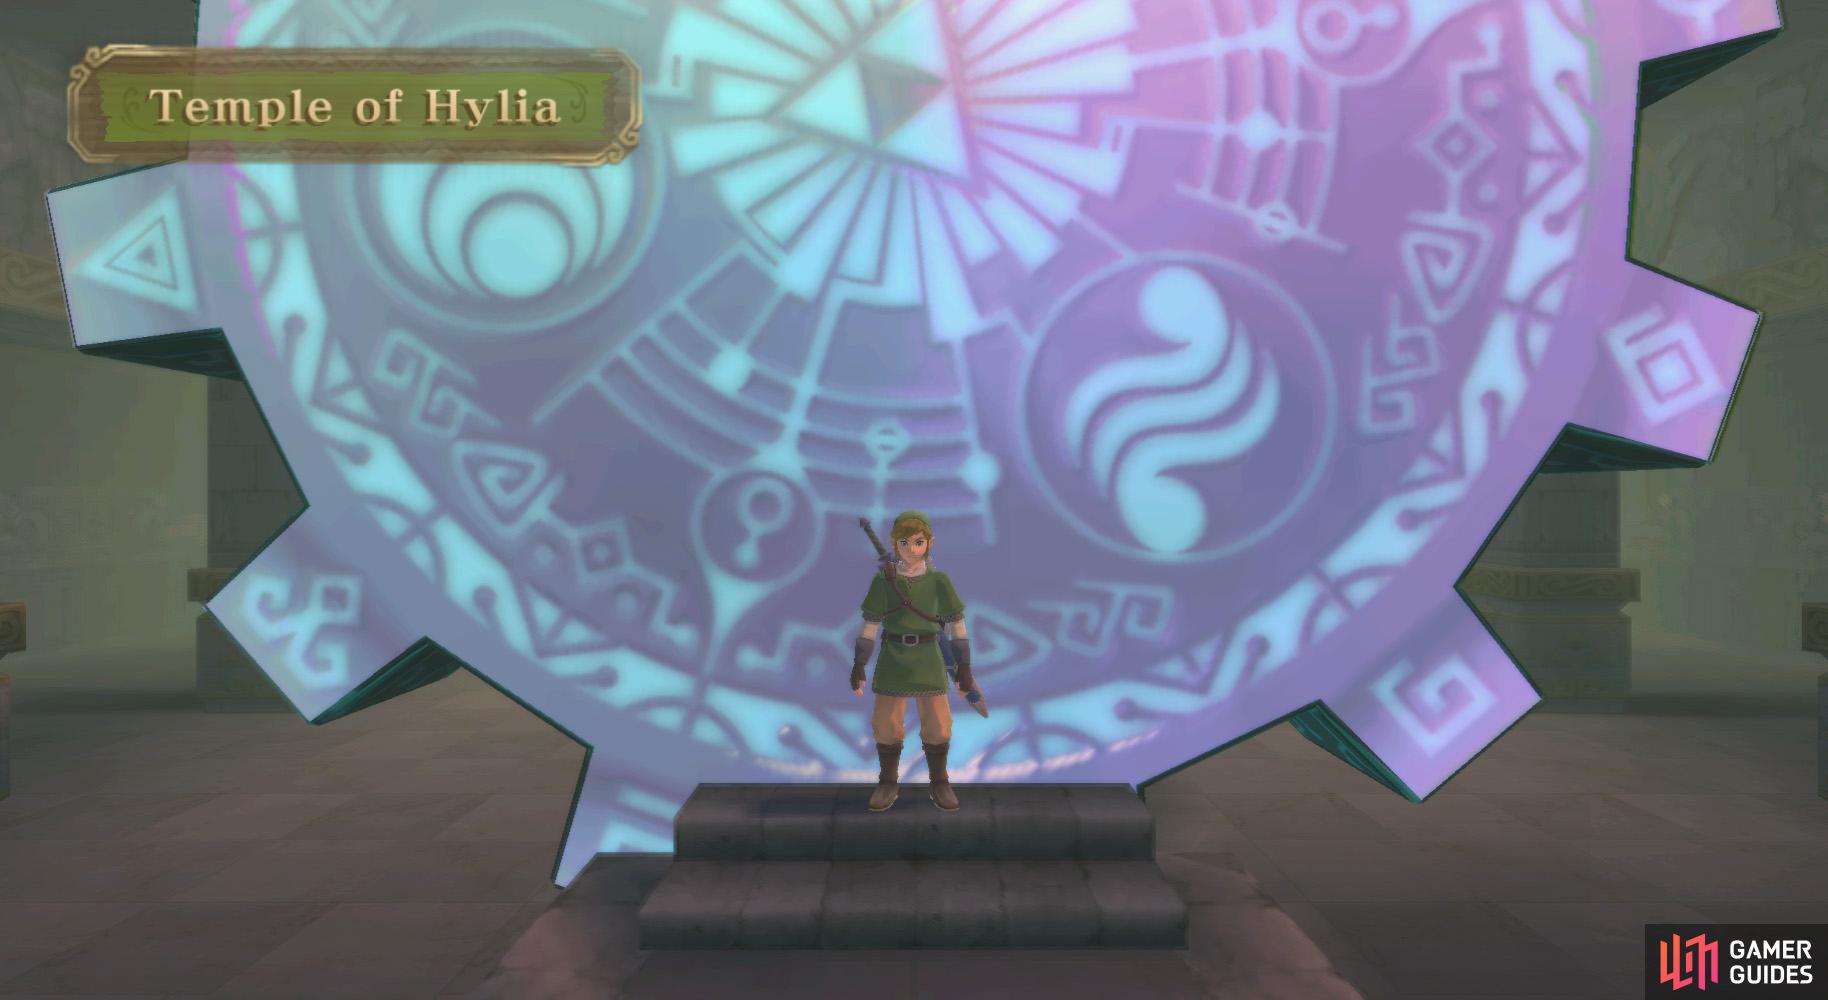 On the other side of the gate, you'll arive at the Temple of Hylia.